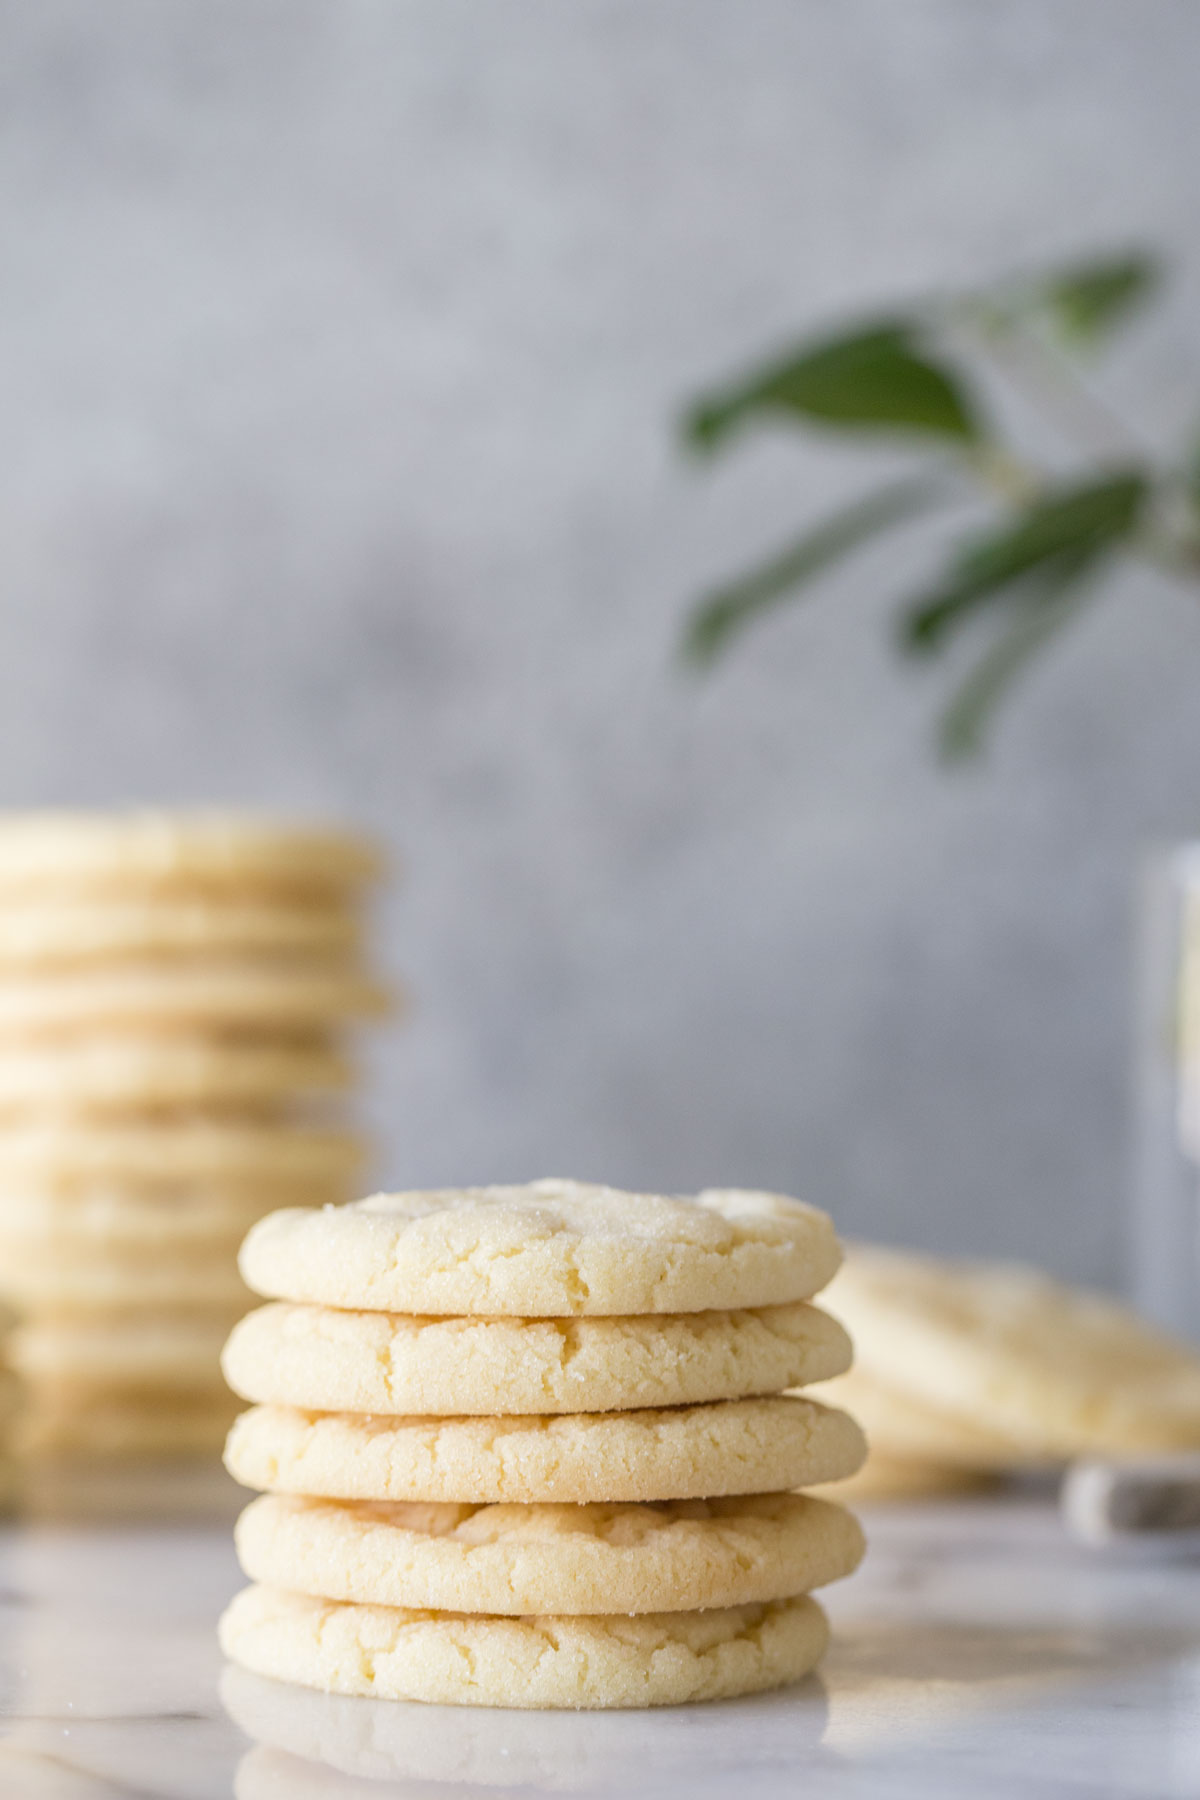 https://d2t88cihvgacbj.cloudfront.net/manage/wp-content/uploads/2019/08/Soft-and-Chewy-Sugar-Cookies-1.jpg?x24658